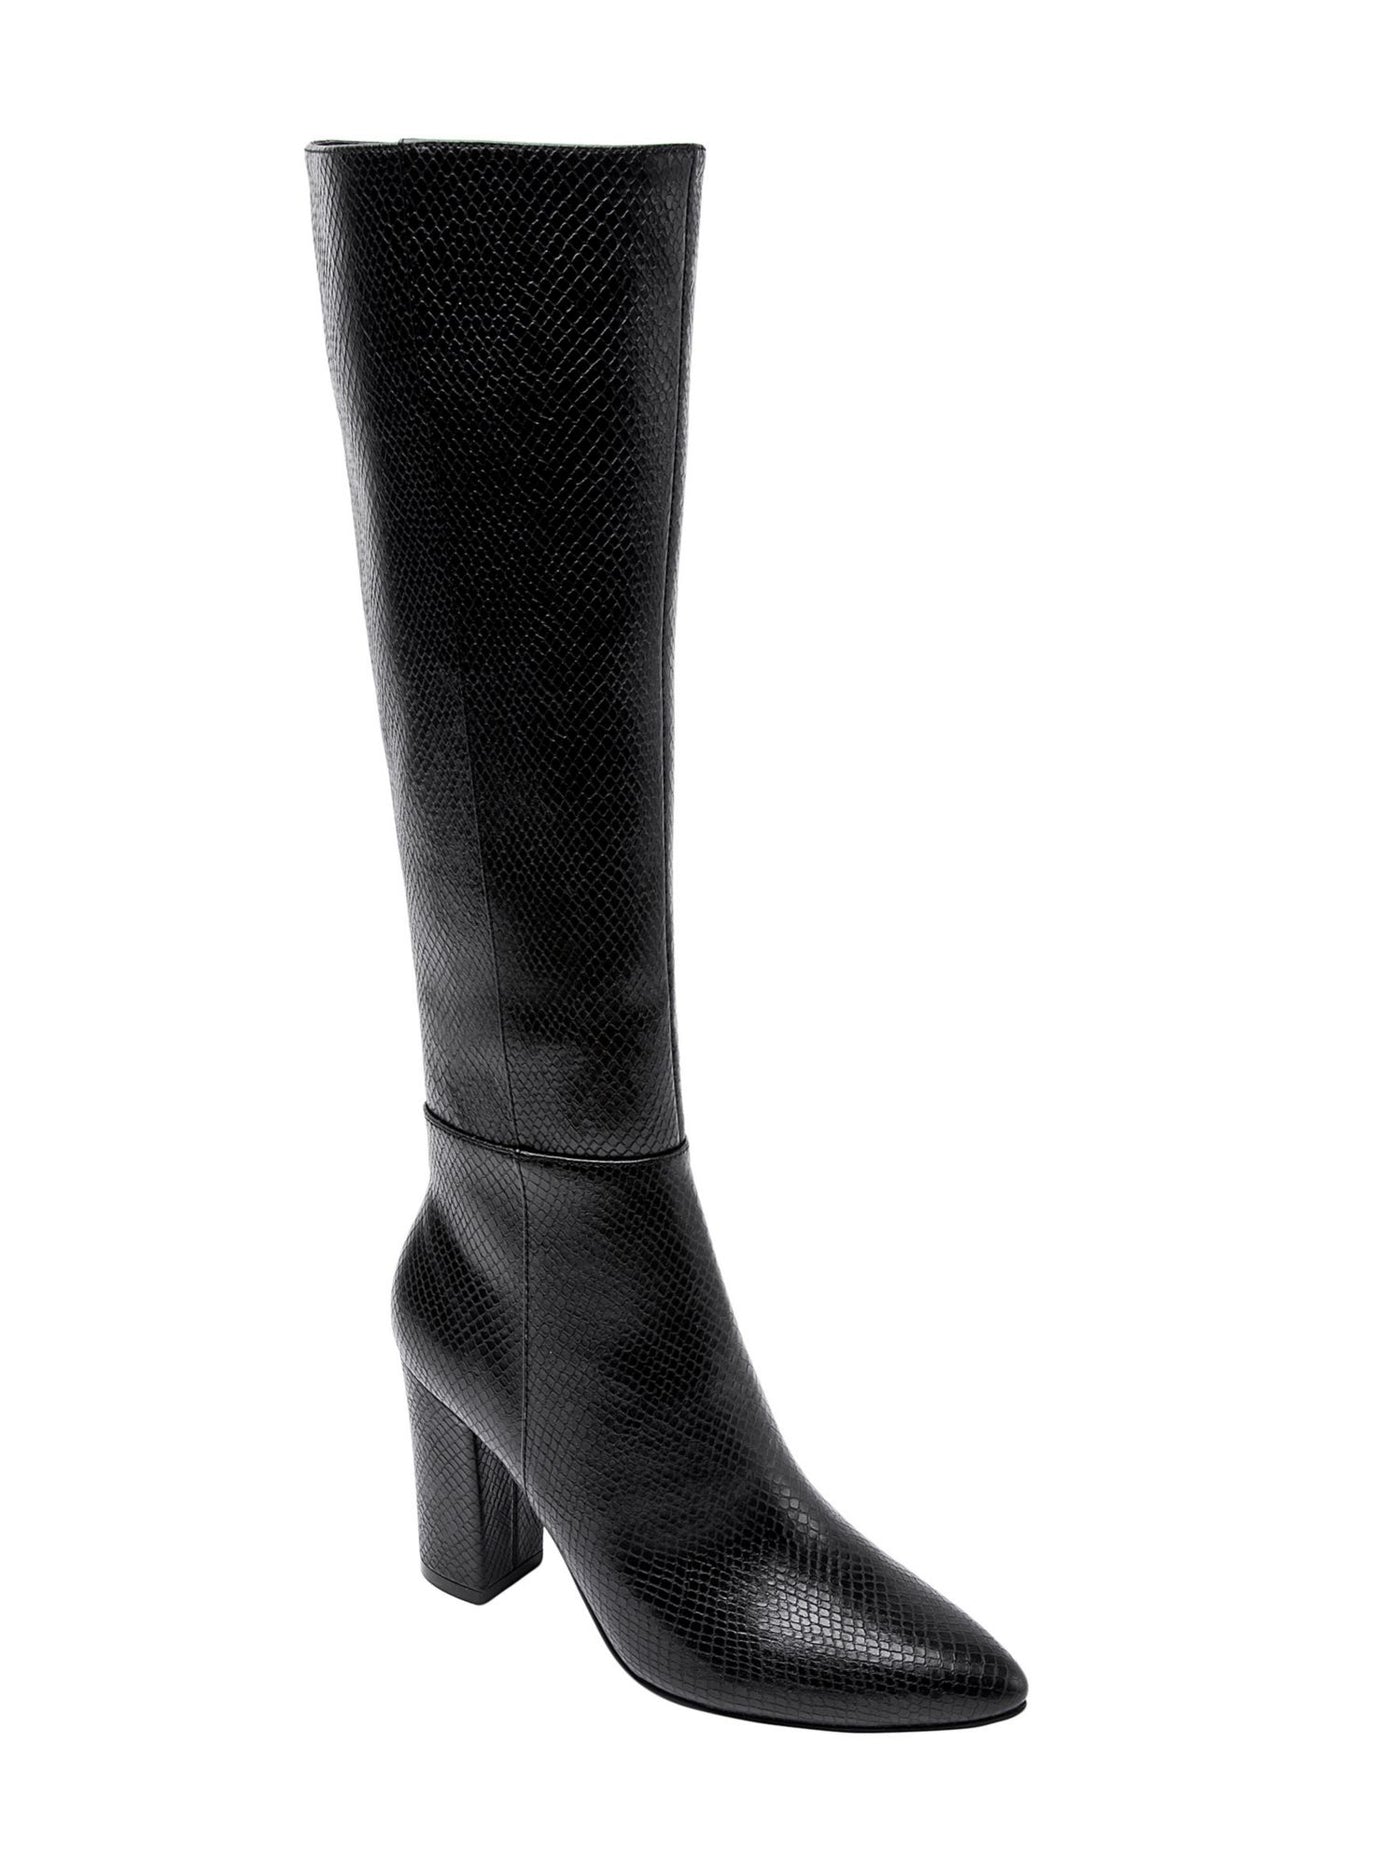 JANE AND THE SHOE Womens Black Snakeskin Padded Fay Pointy Toe Block Heel Zip-Up Heeled Boots 8